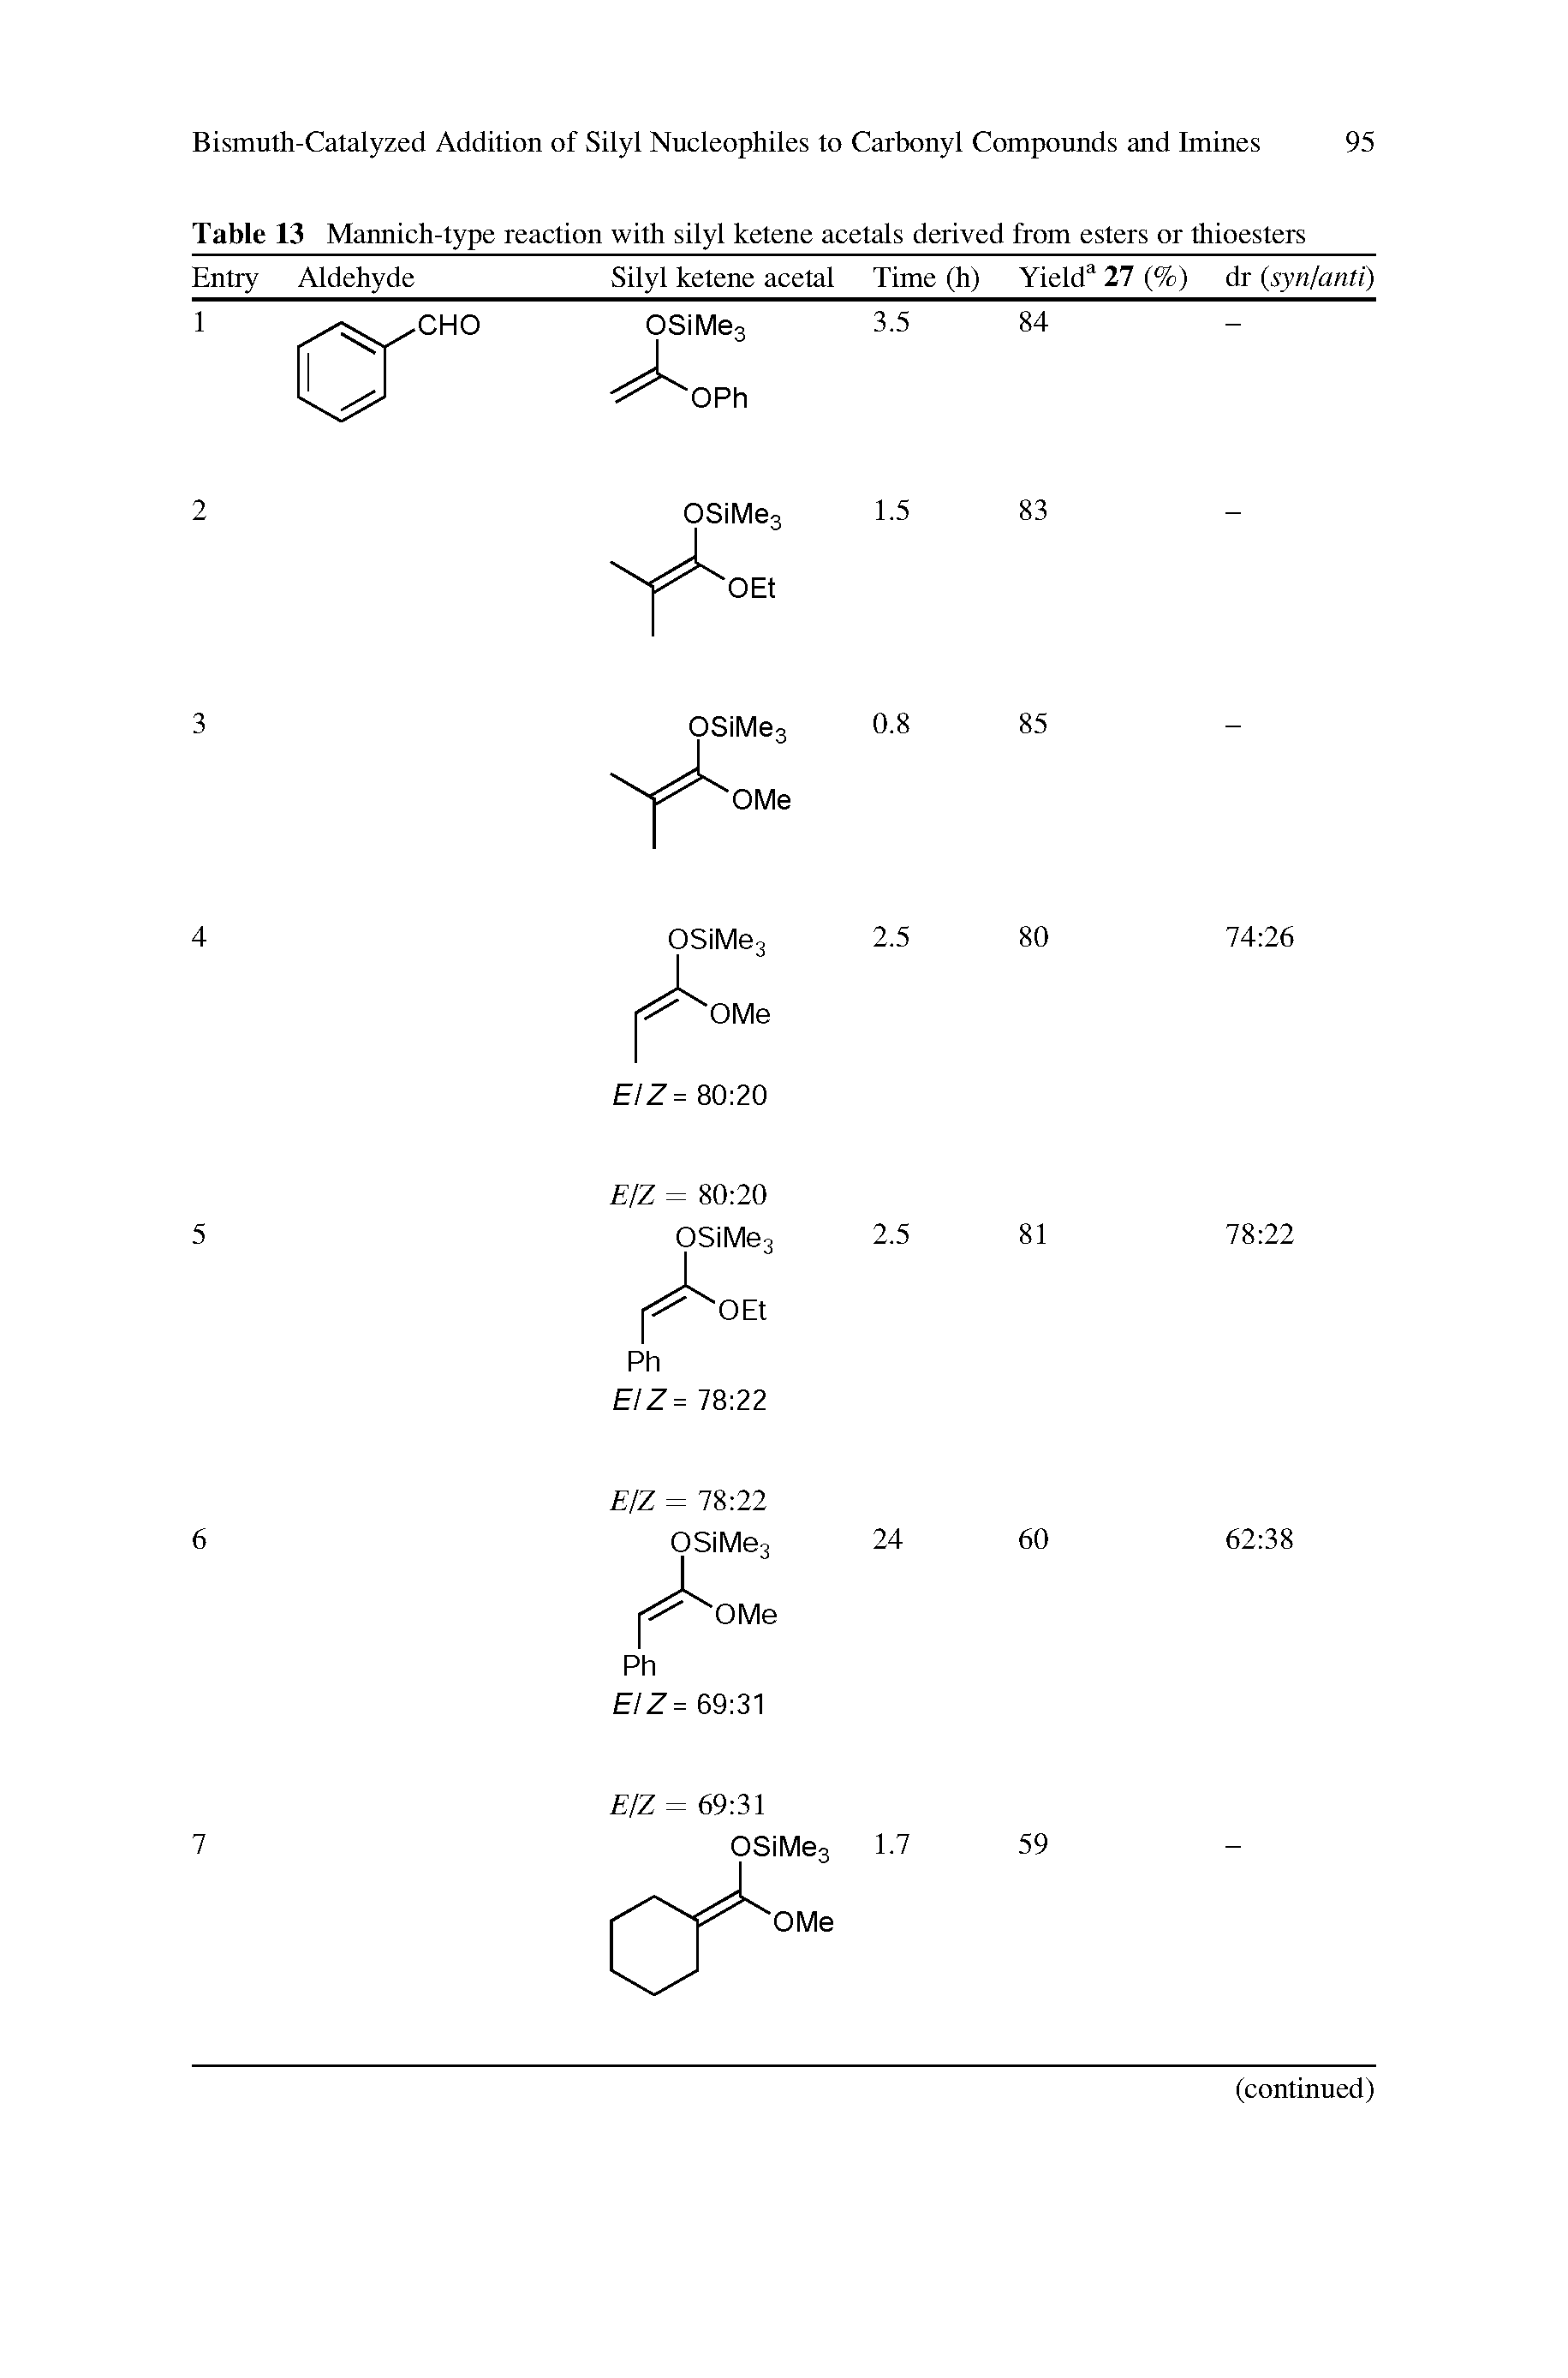 Table 13 Mannich-type reaction with silyl ketene acetals derived from esters or thioesters...